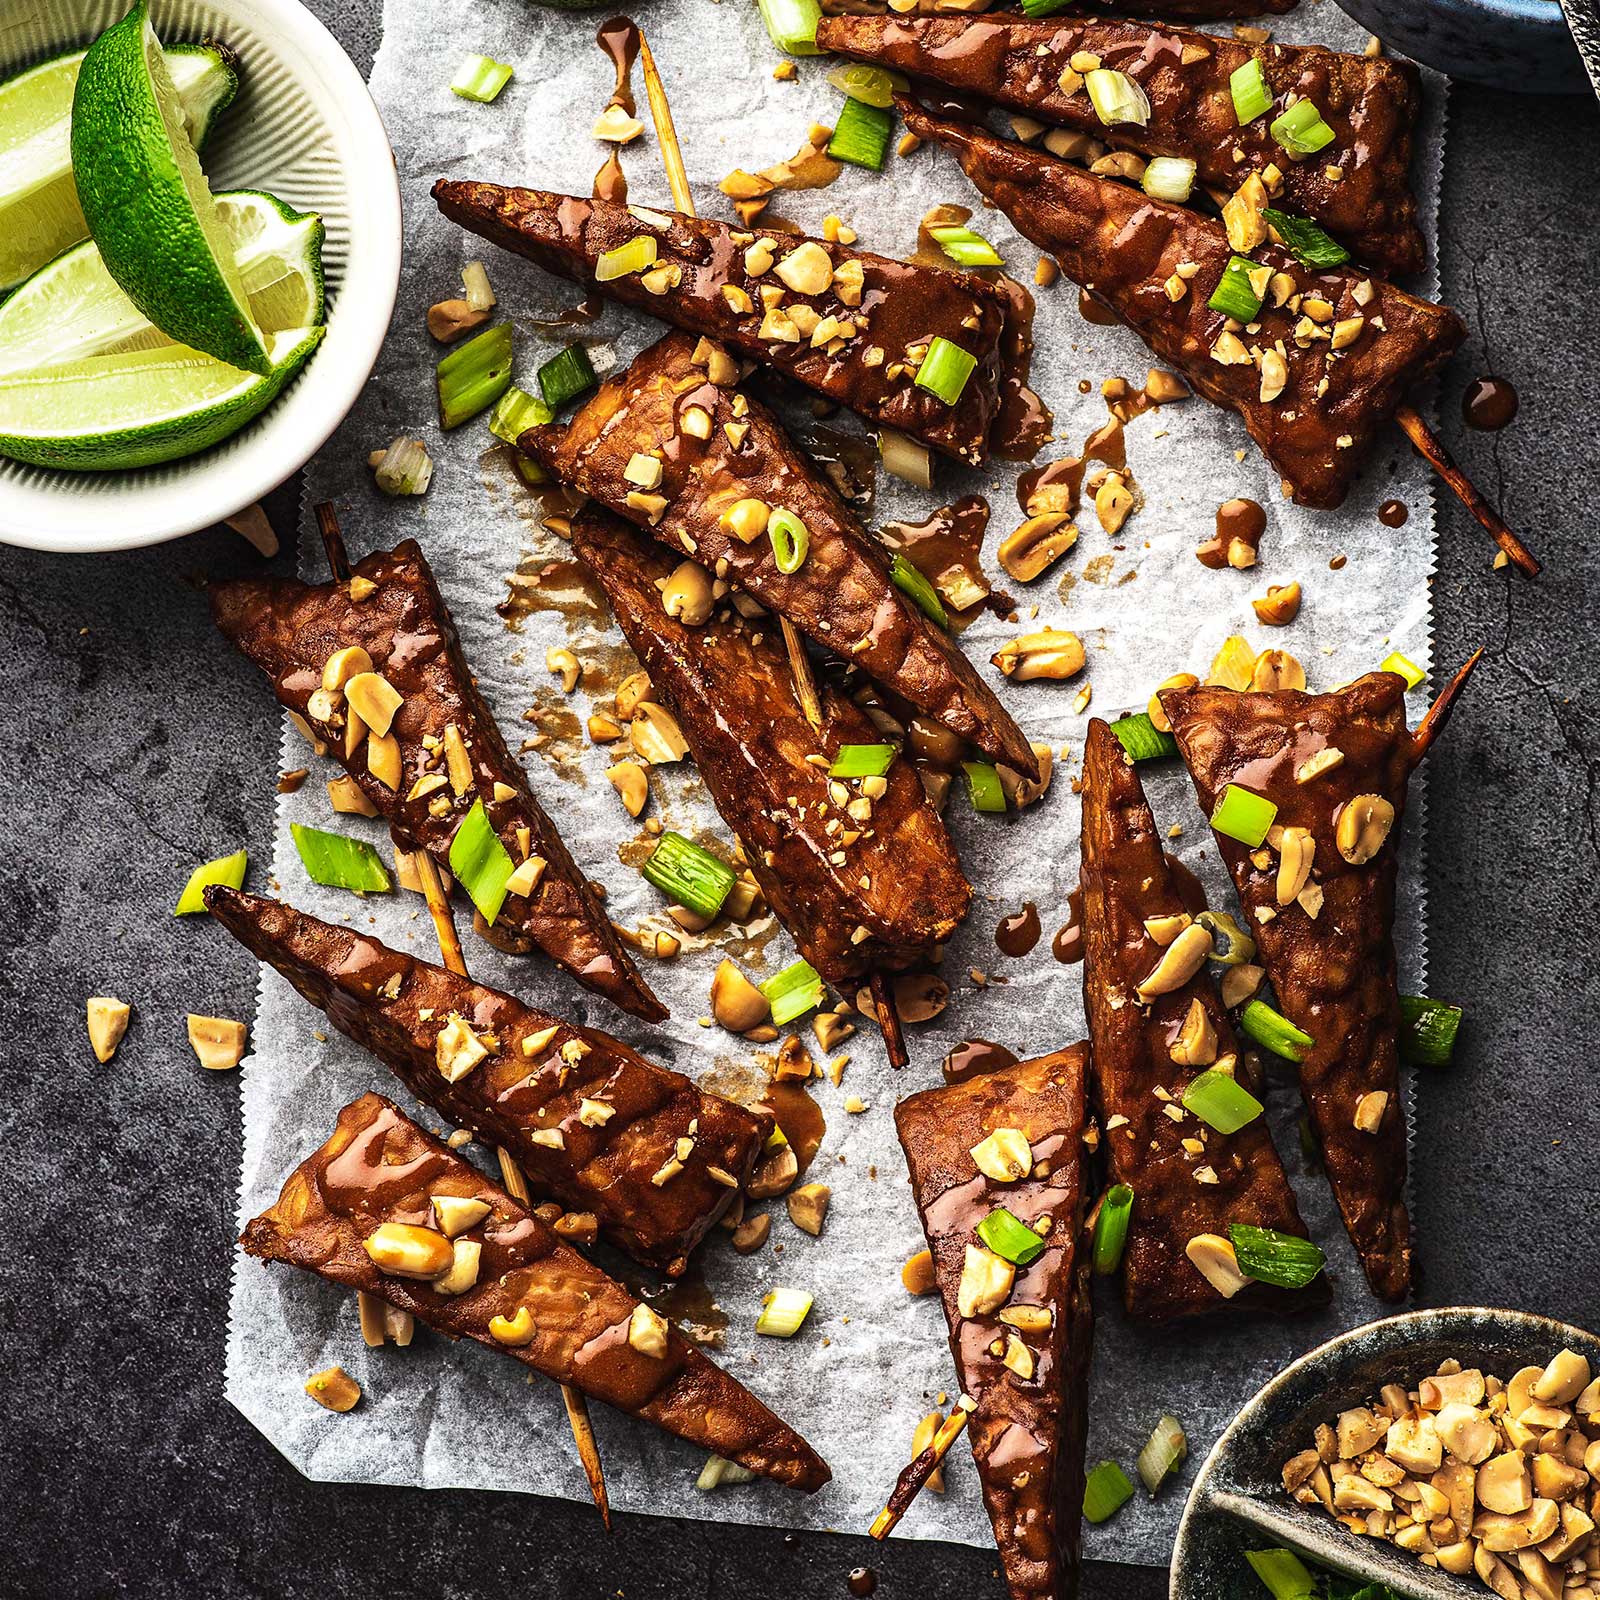 Wedges of smokey tempeh peanut satay are arranged on a piece of baking paper. The wedges have been garnished with crushed peanuts and spices of spring onion. A bowl of lime wedges sit at the side.